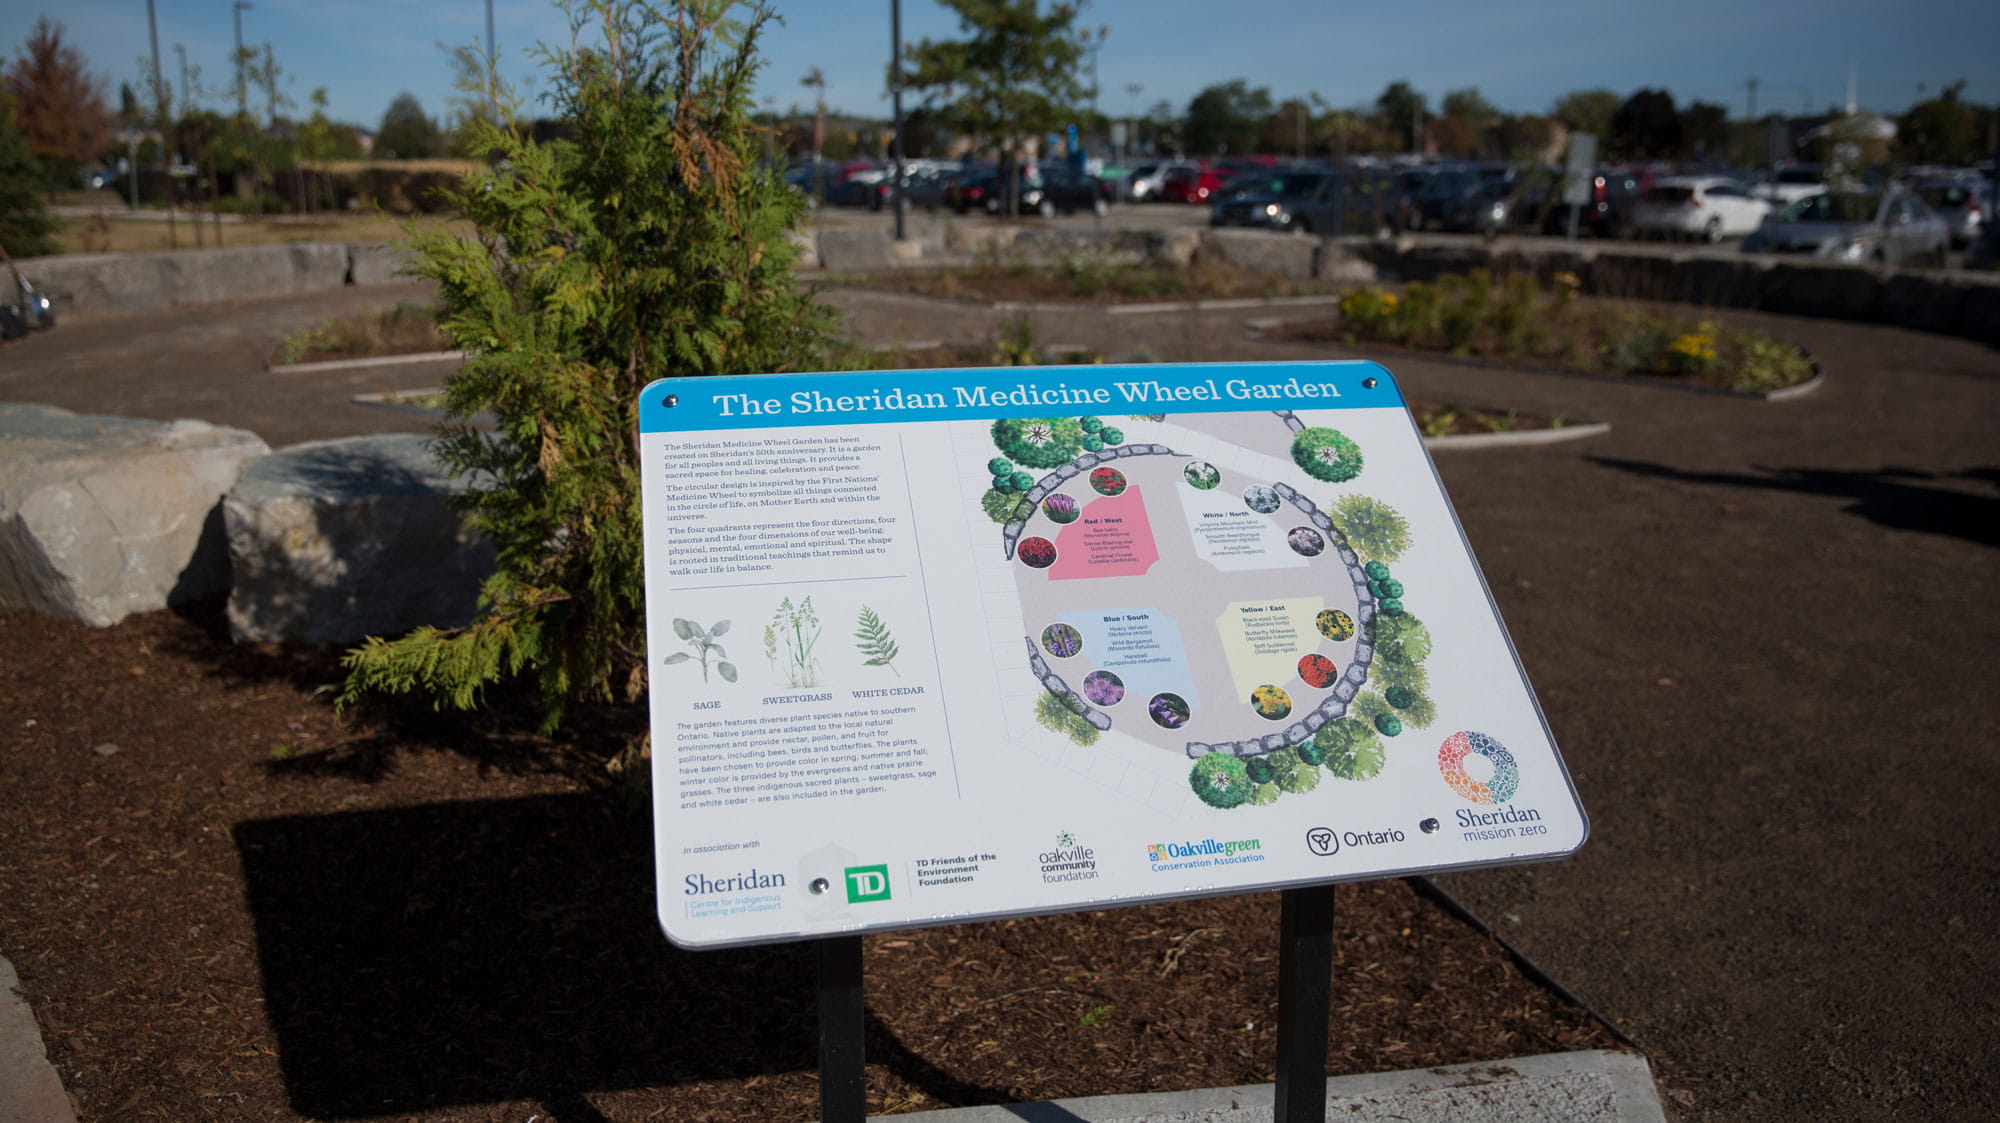 A sign in front of the Medicine Wheel Garden at Sheridan's Trafalgar Campus, with information about the garden